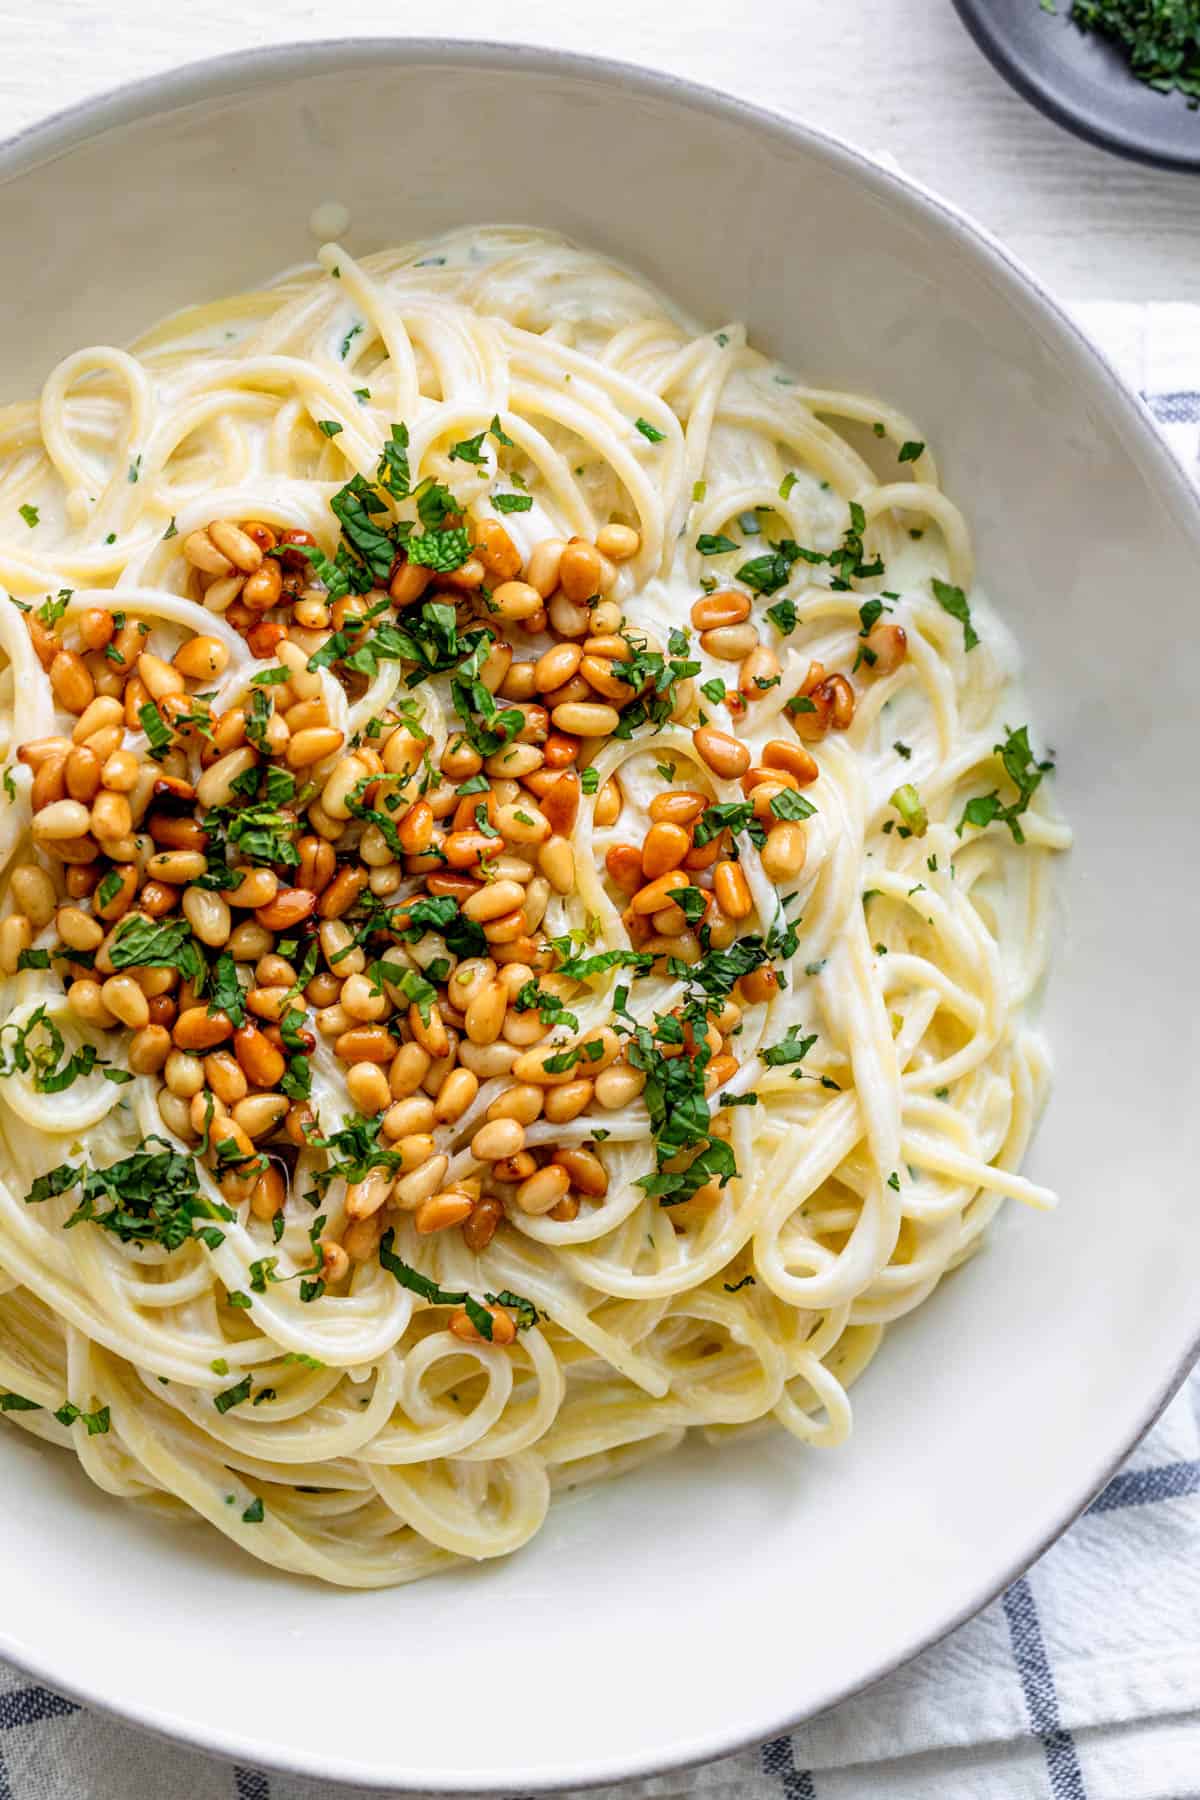 Spaghetti in Yogurt Sauce topped with pine nuts and chopped herbs, served in large white bowl.